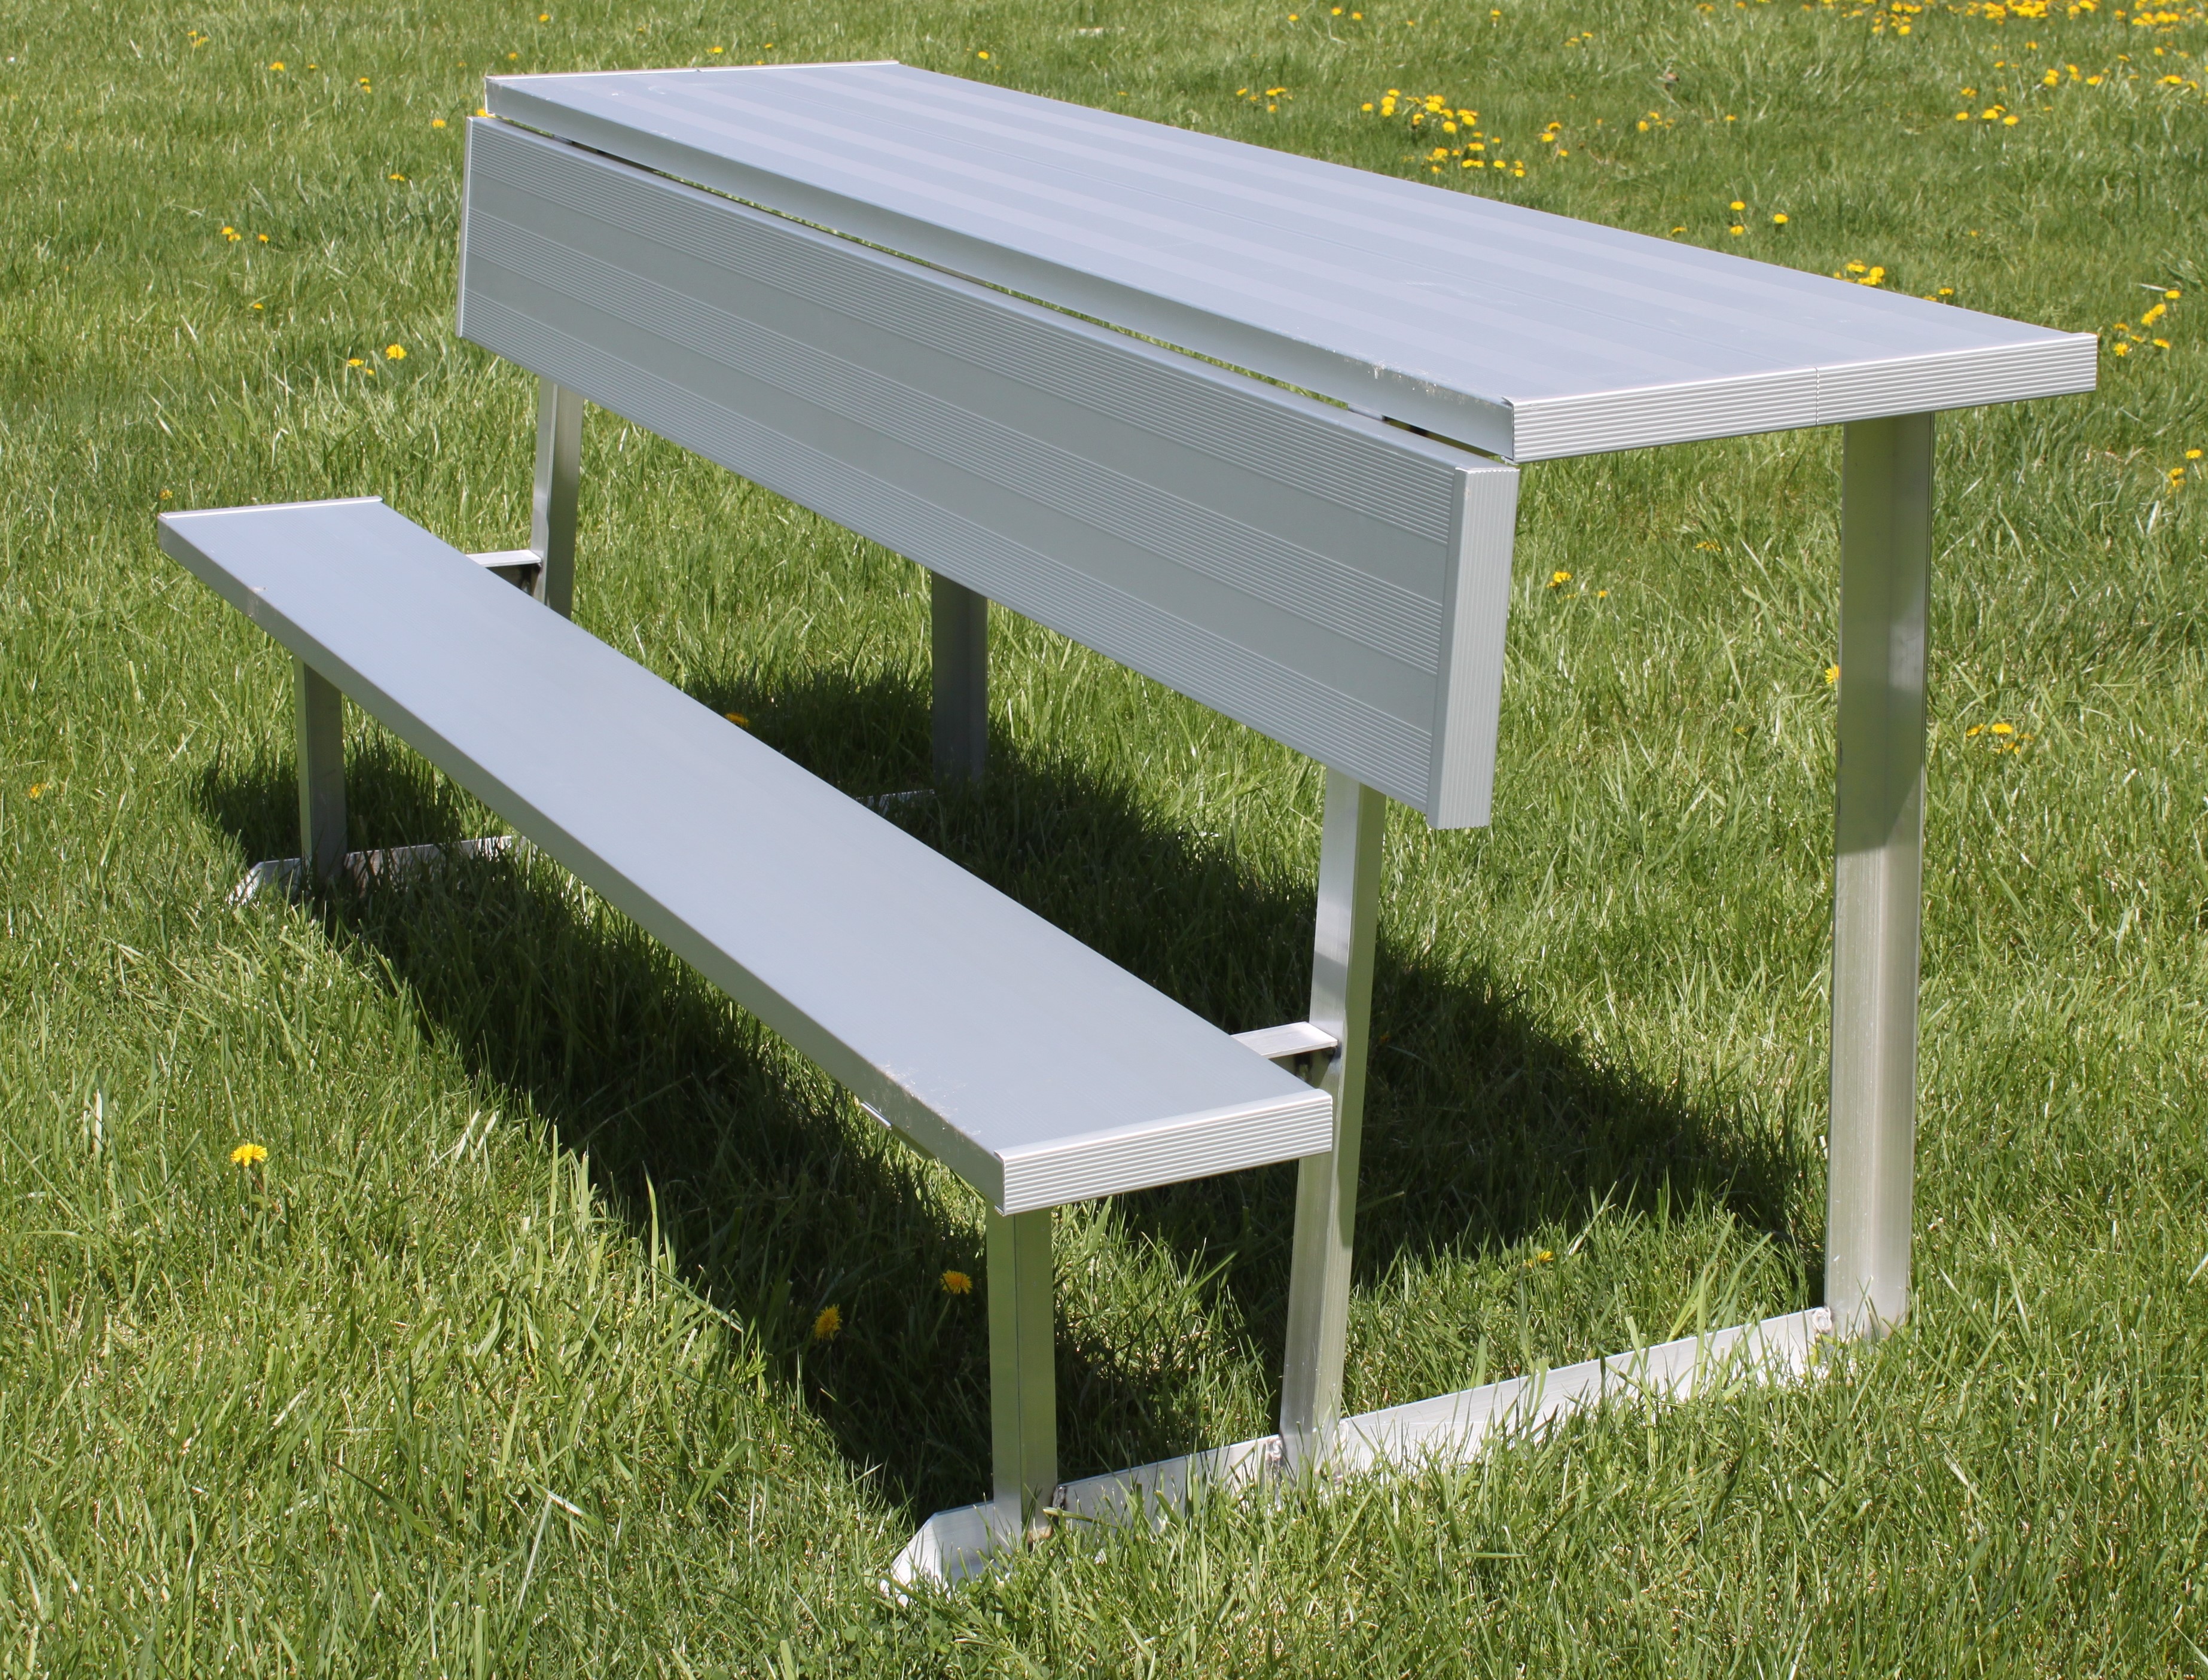 Spectator 15 Portable Bench With Shelf